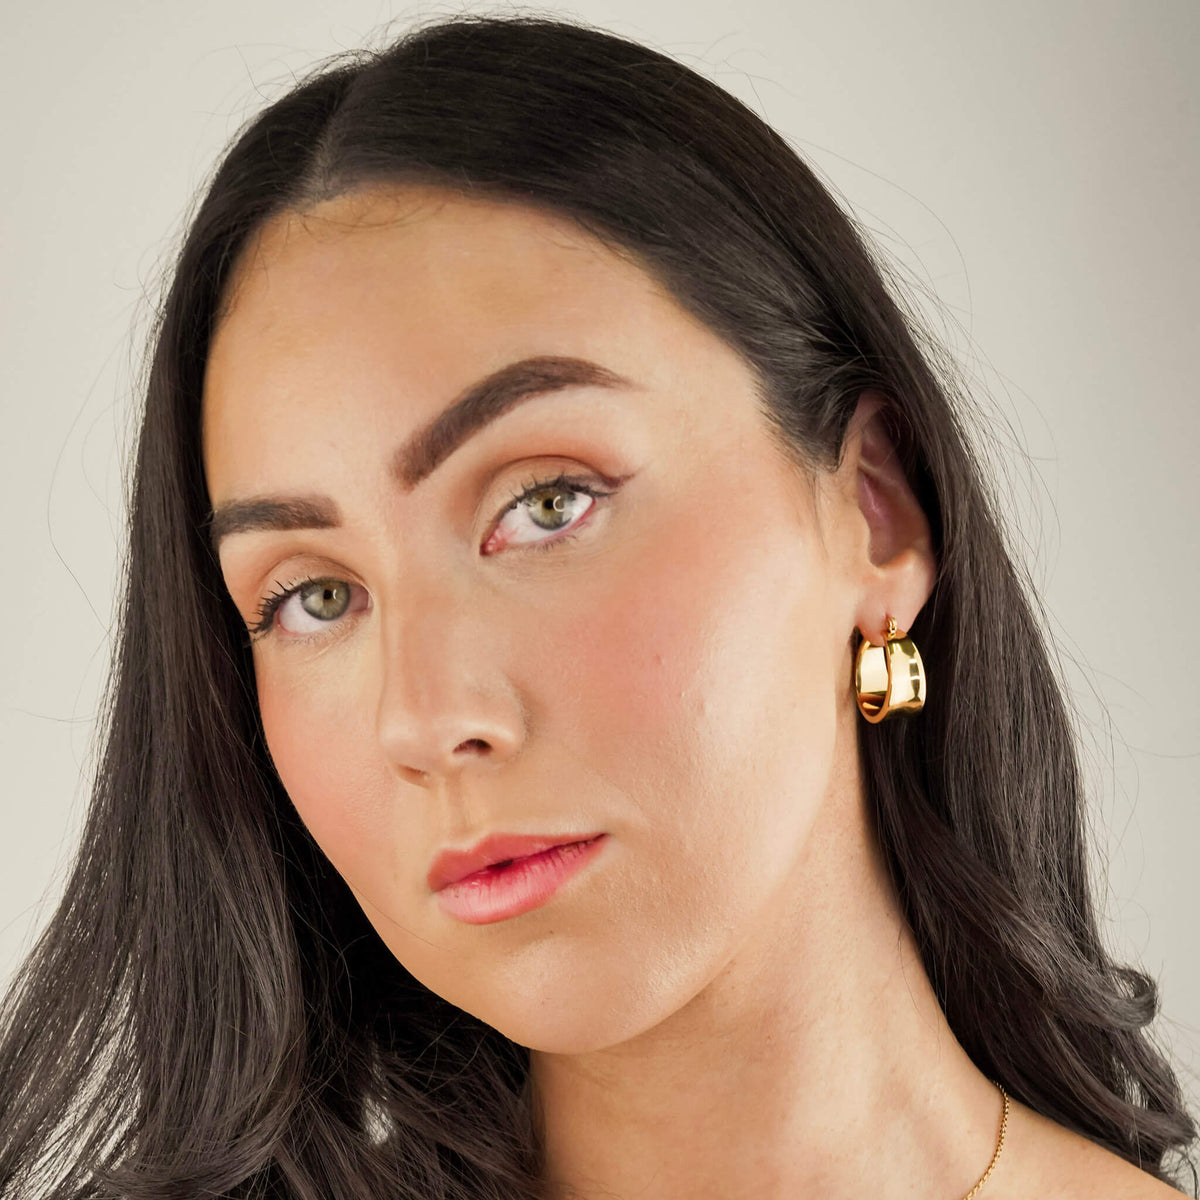 the model is wearing chunky statement earrings called the assertion hoops. They are lightweight and comfortable to wear, despite their commanding size. These earrings have a unique design that mirrors a cuff. 